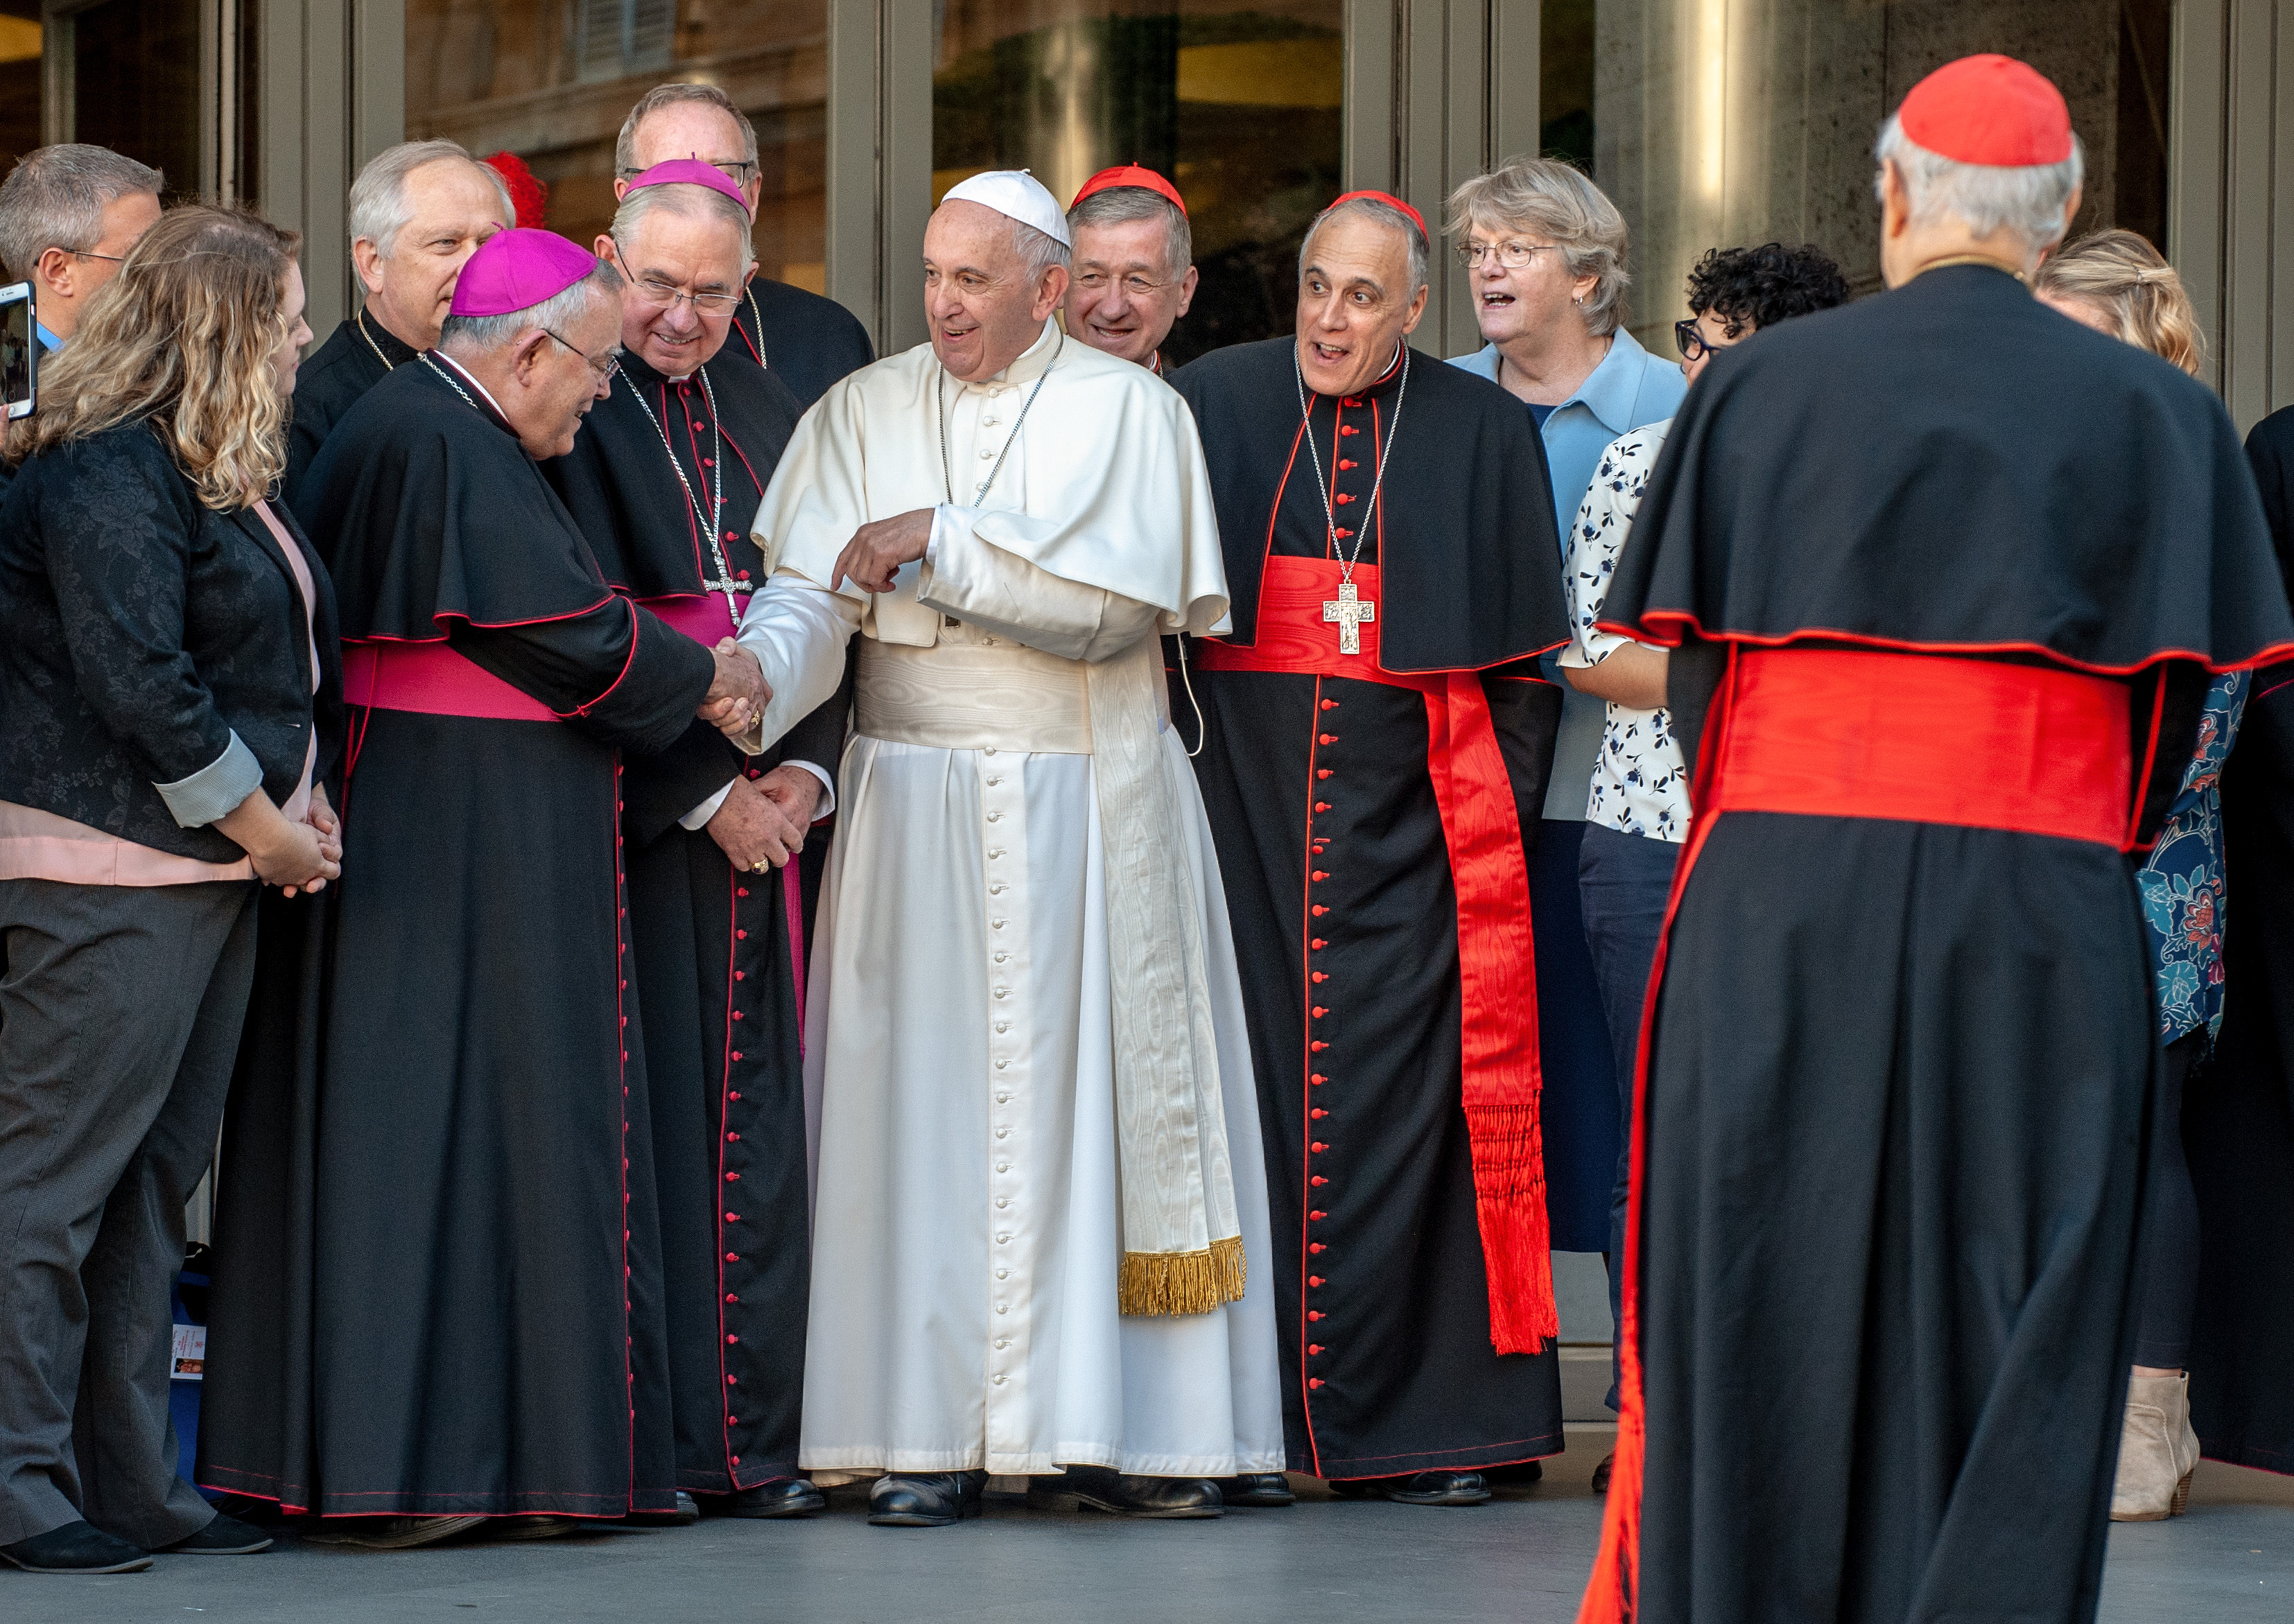 Final synod doc: Church most focus on listening to, welcoming the young